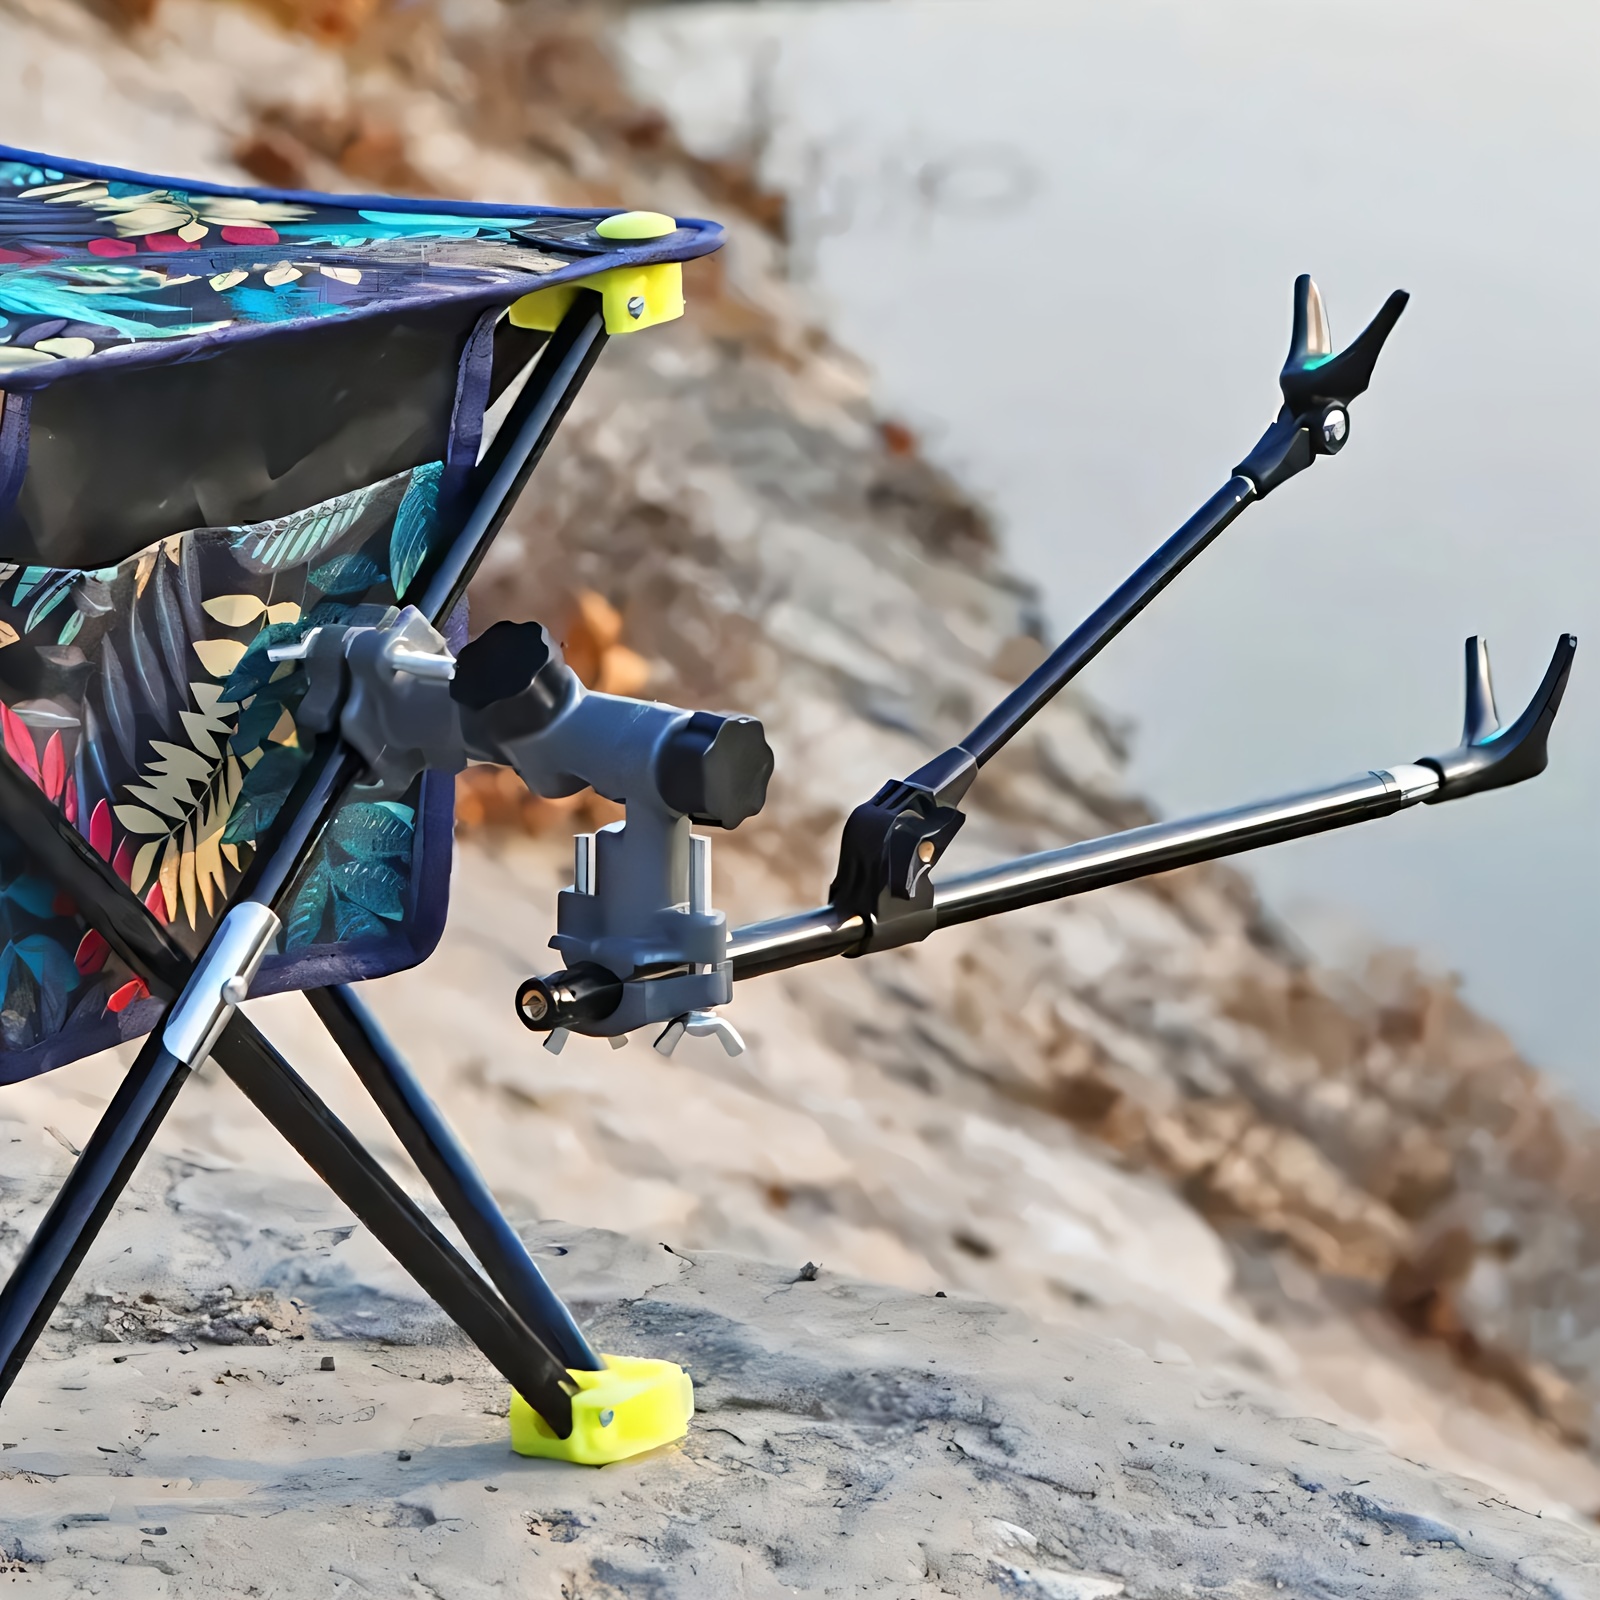 

360° Adjustable Fishing Chair Rod Holder - Universal Clamp-on Fish Rod Rack With Multi-purpose Gear Attachments, Durable Abs Construction - Ideal For Securing Umbrella, Net, Bait Tray, And More